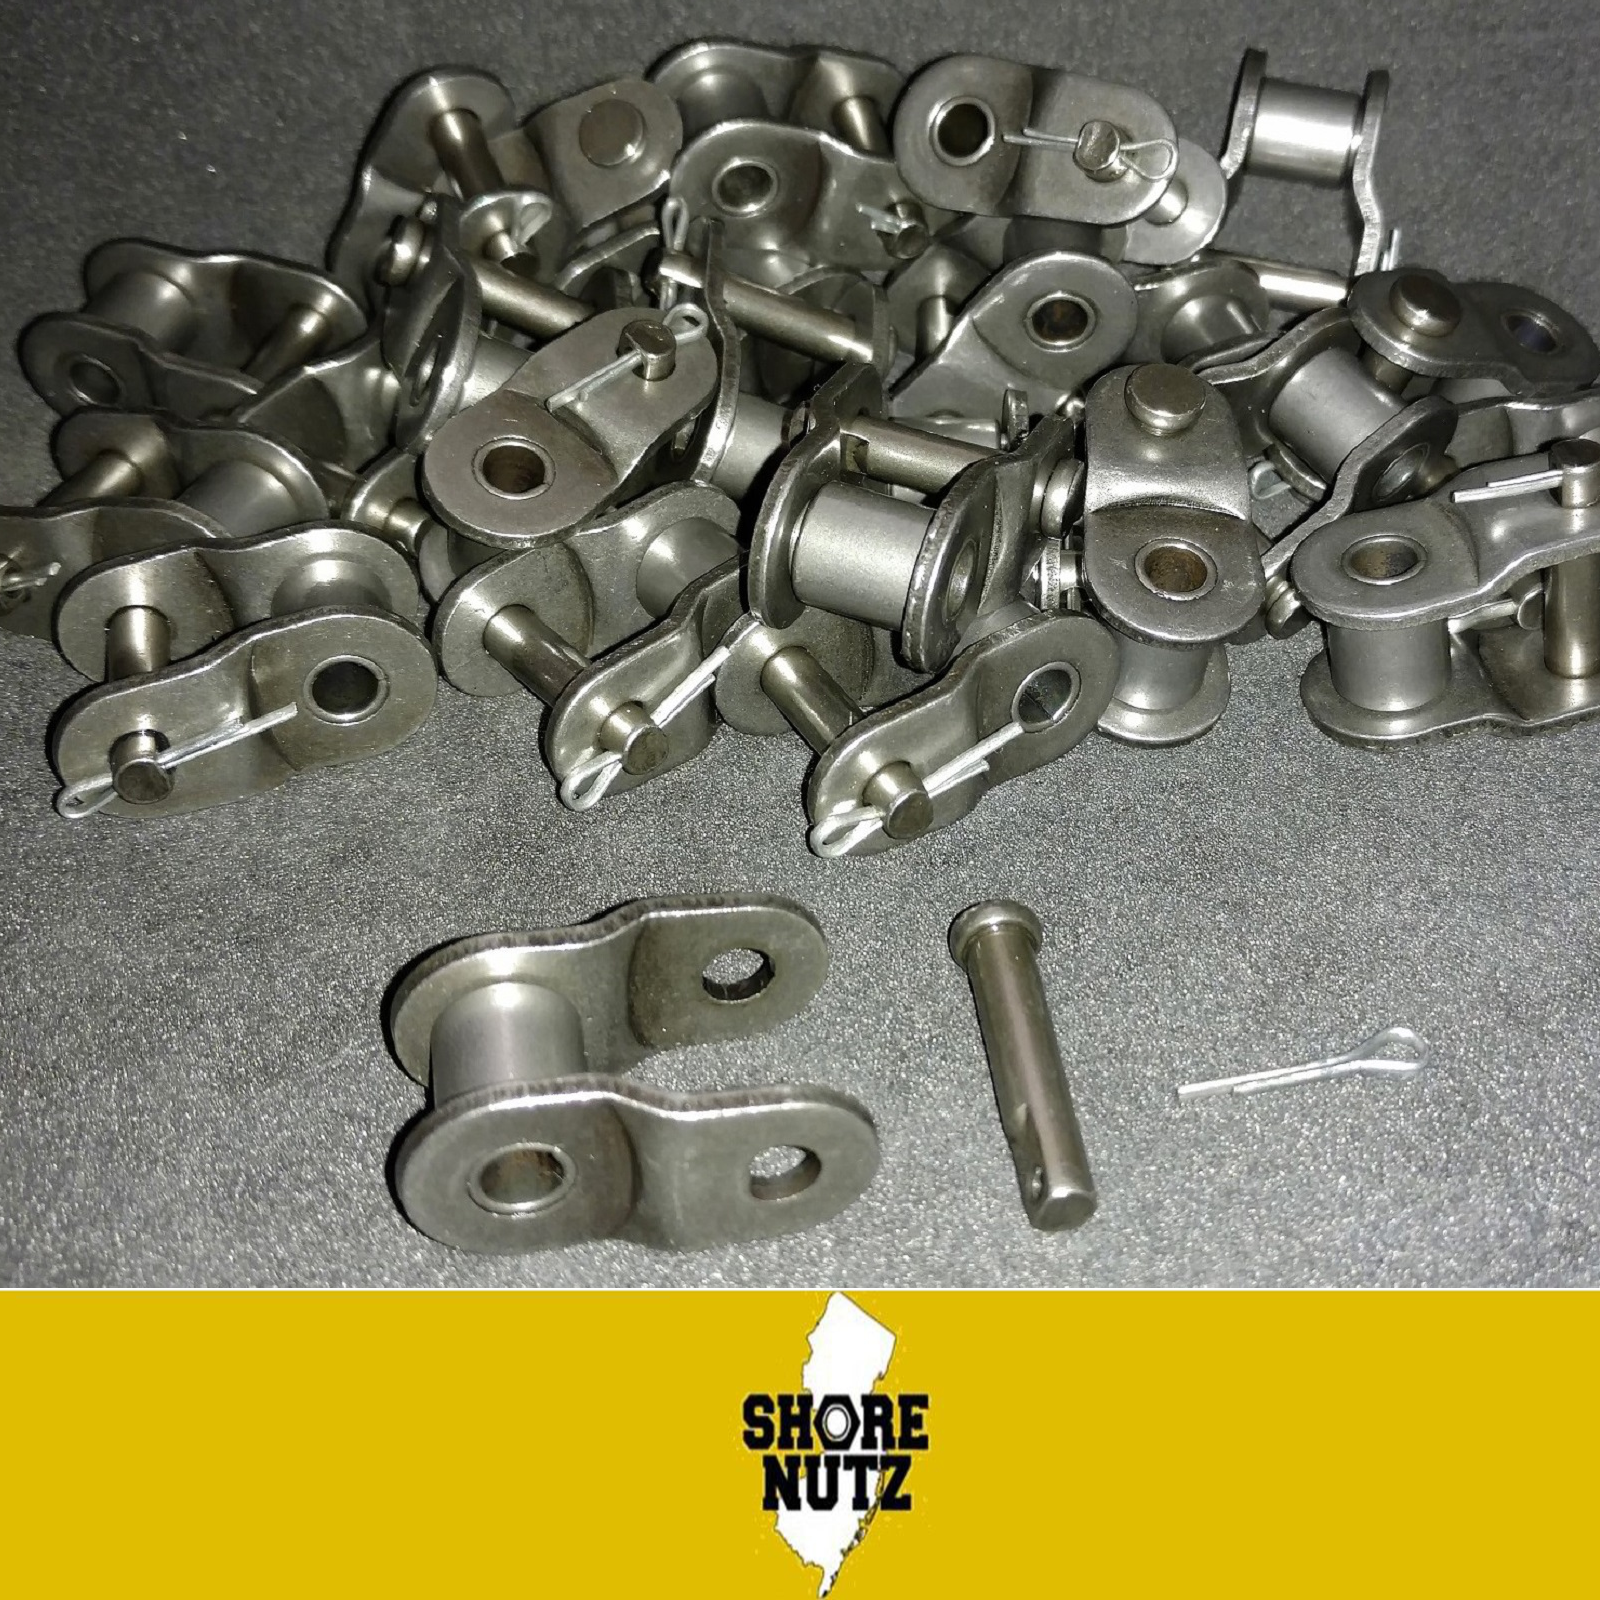 #40 Chain Offset Link Qty 10 Pieces Half Link 1/2" Pitch 40o/l